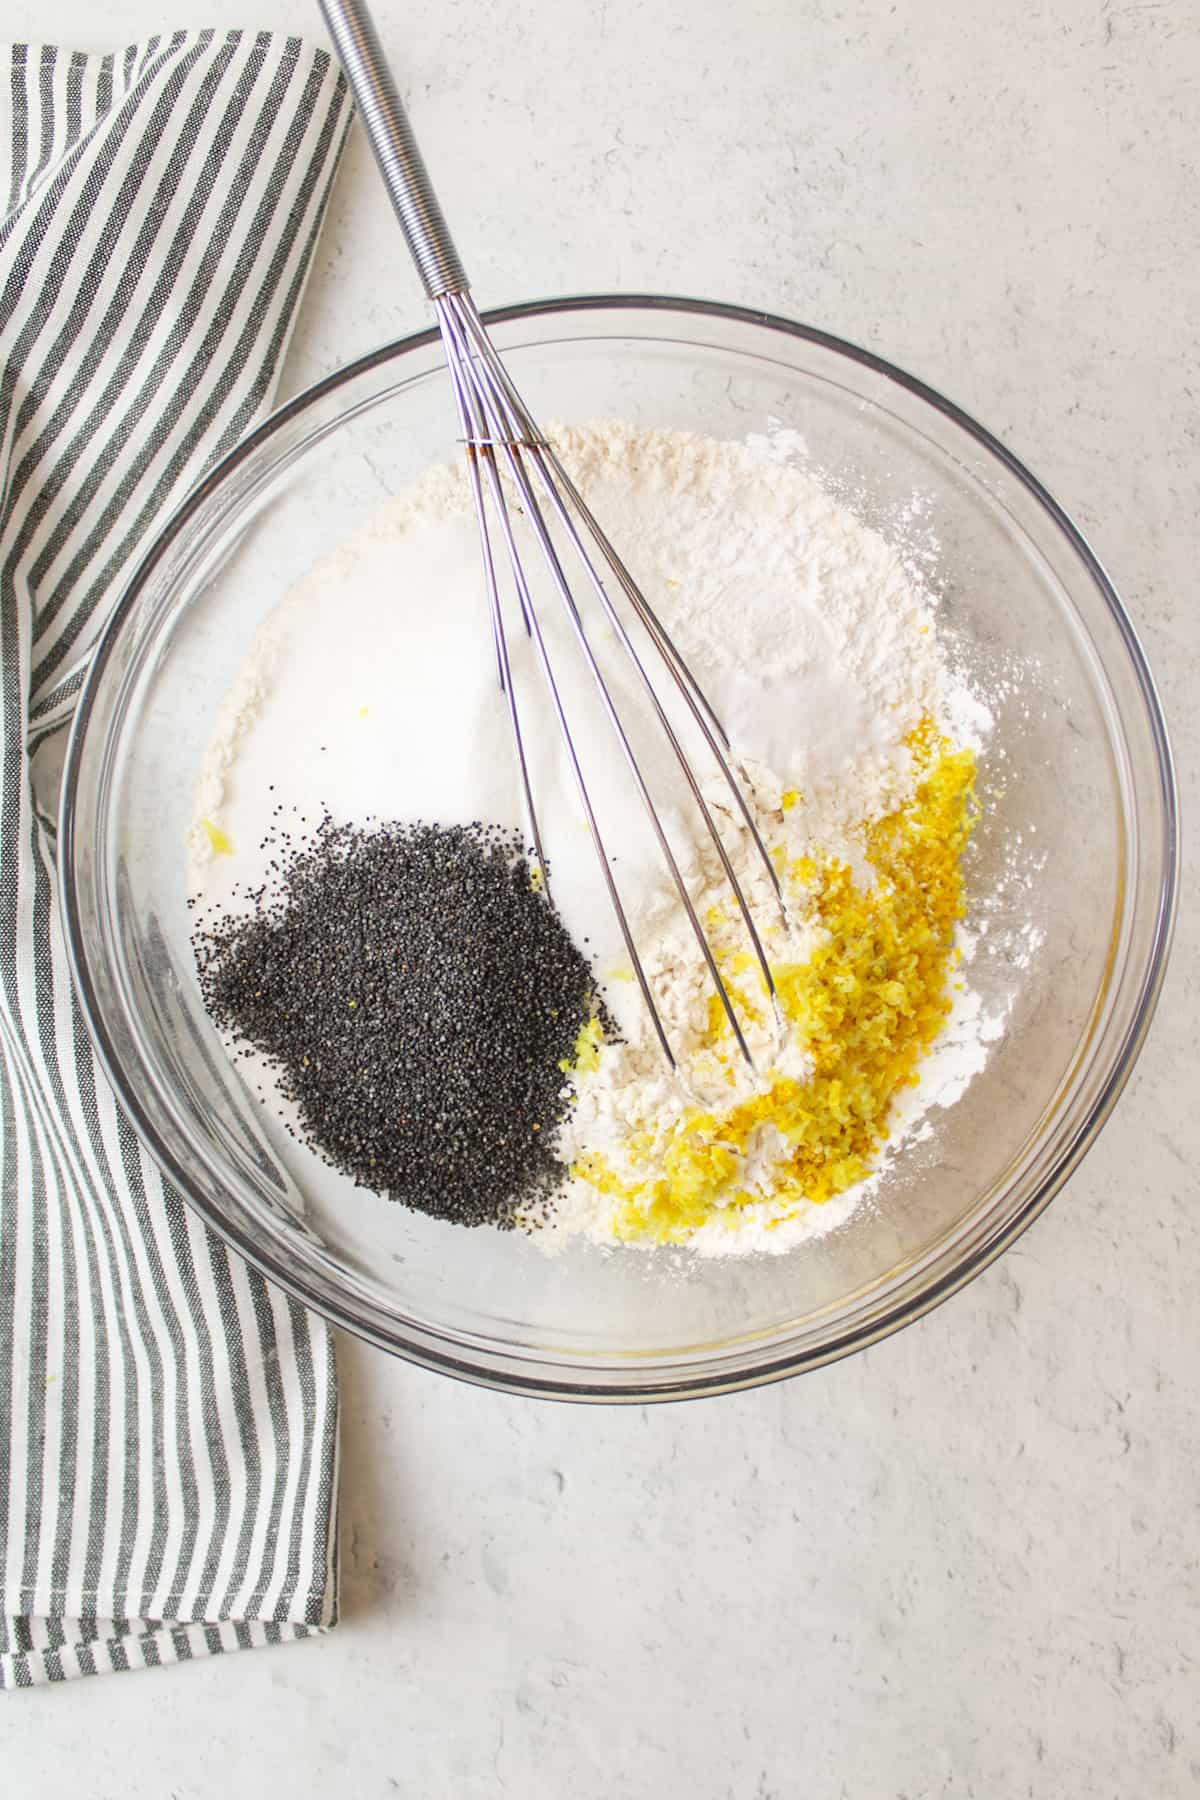 dry ingredients in a mixing bowl with a whisk.